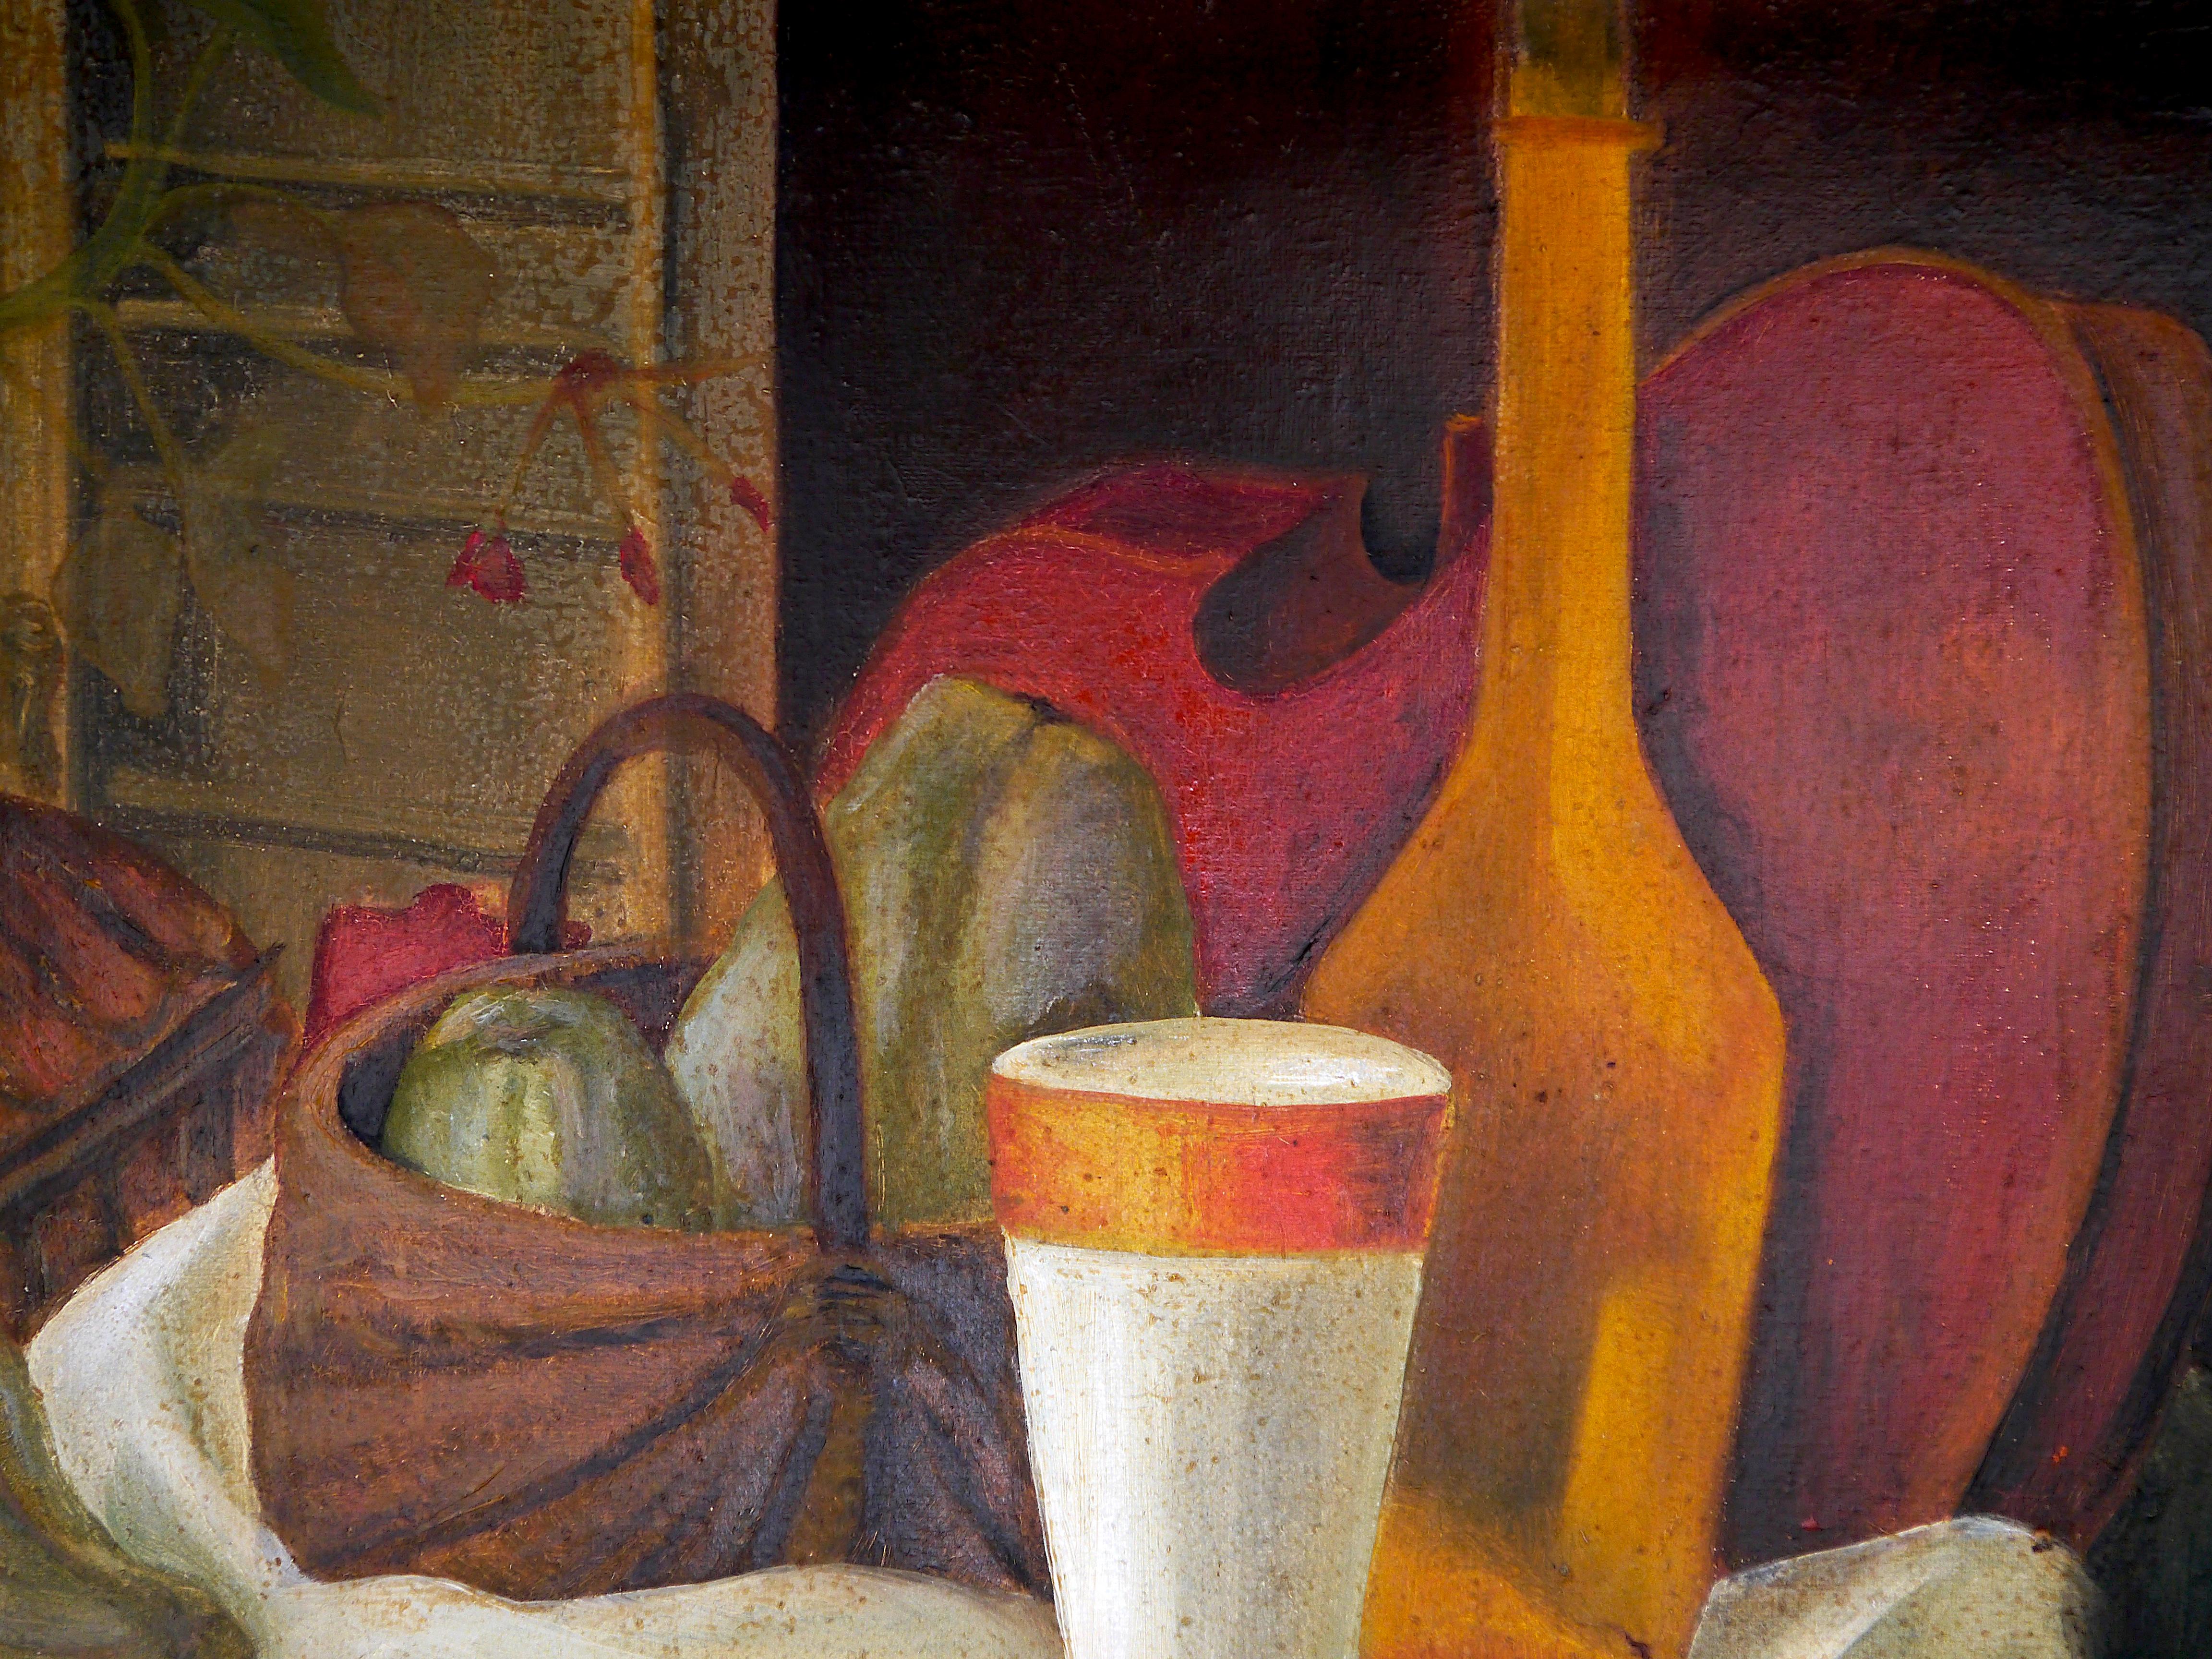 Still life composition

Structural Analysis :
It's an Impressionist still life, composition with glass in the foreground_ behind, flower pot, a basket of vegetables, a bottle, a violin and finally tablecloth. In the background, there are a curtain